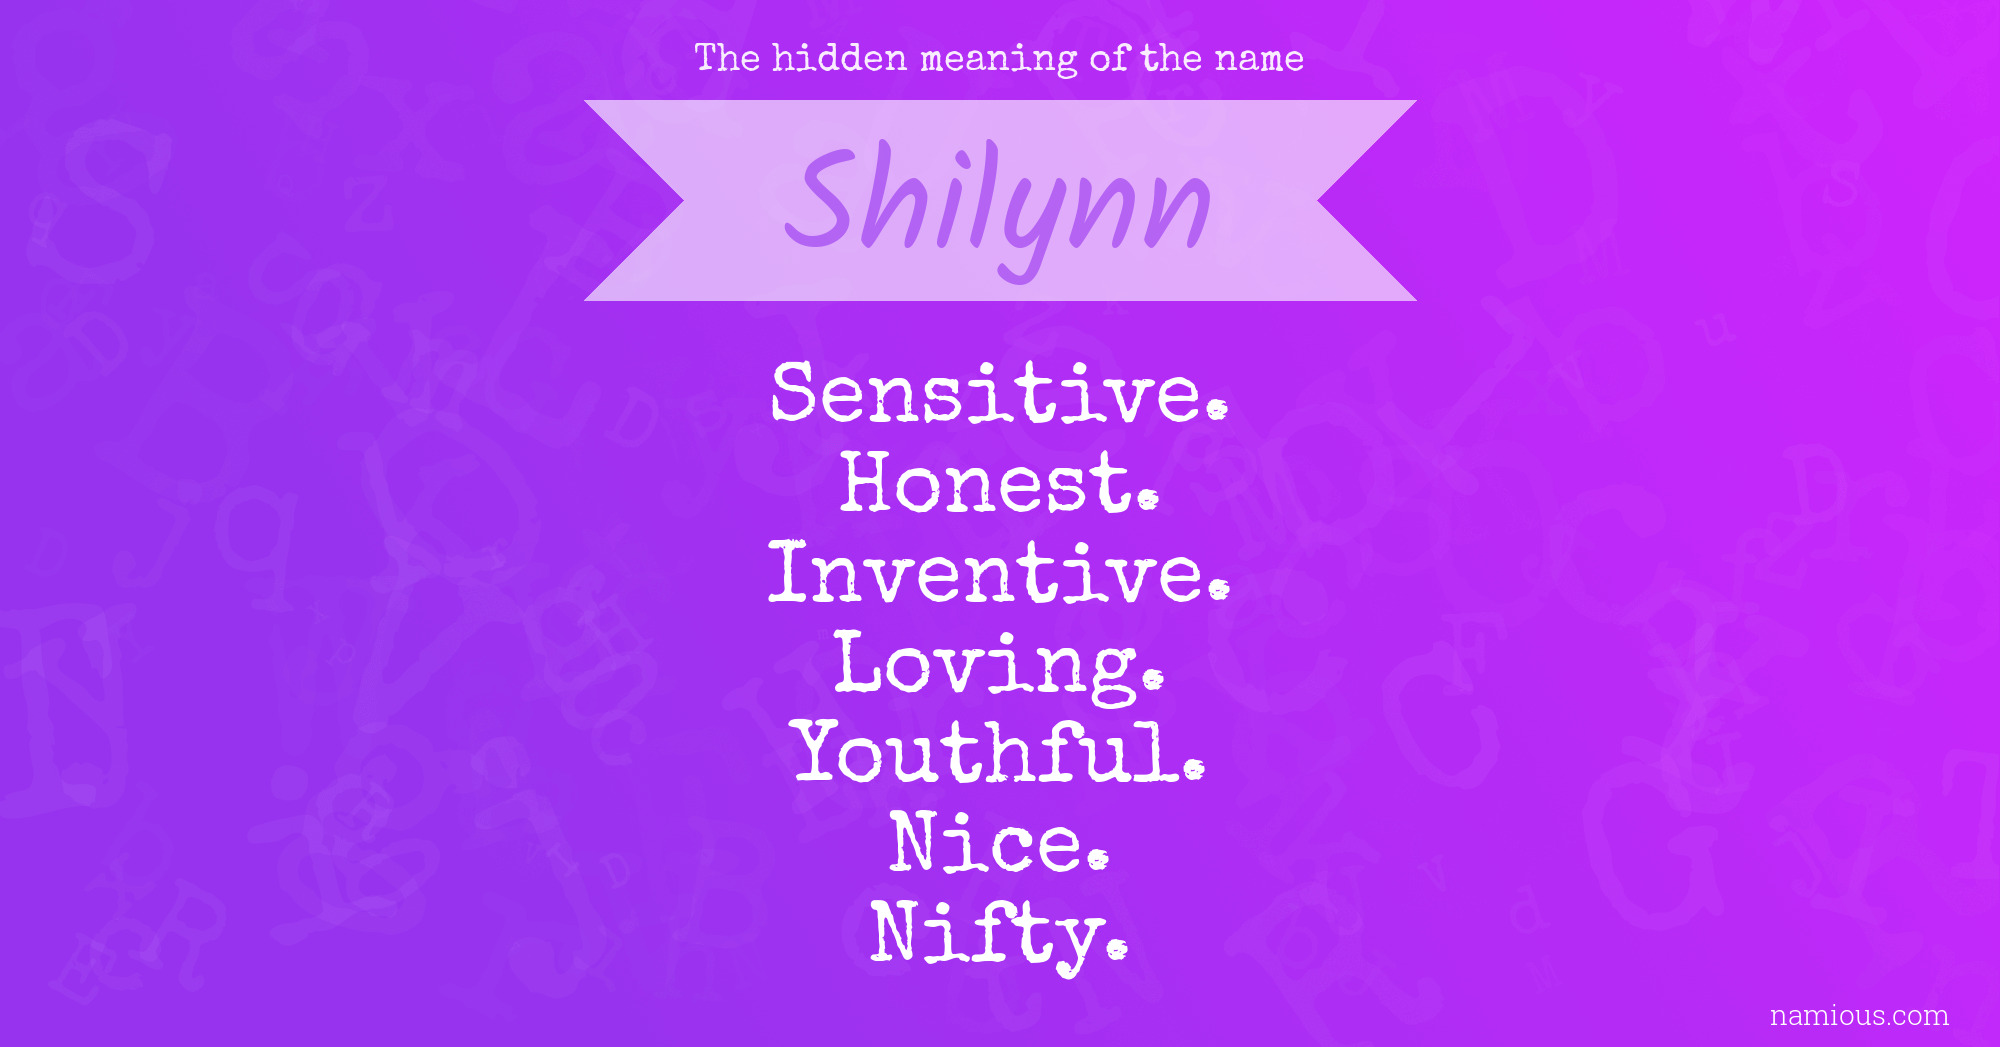 The hidden meaning of the name Shilynn